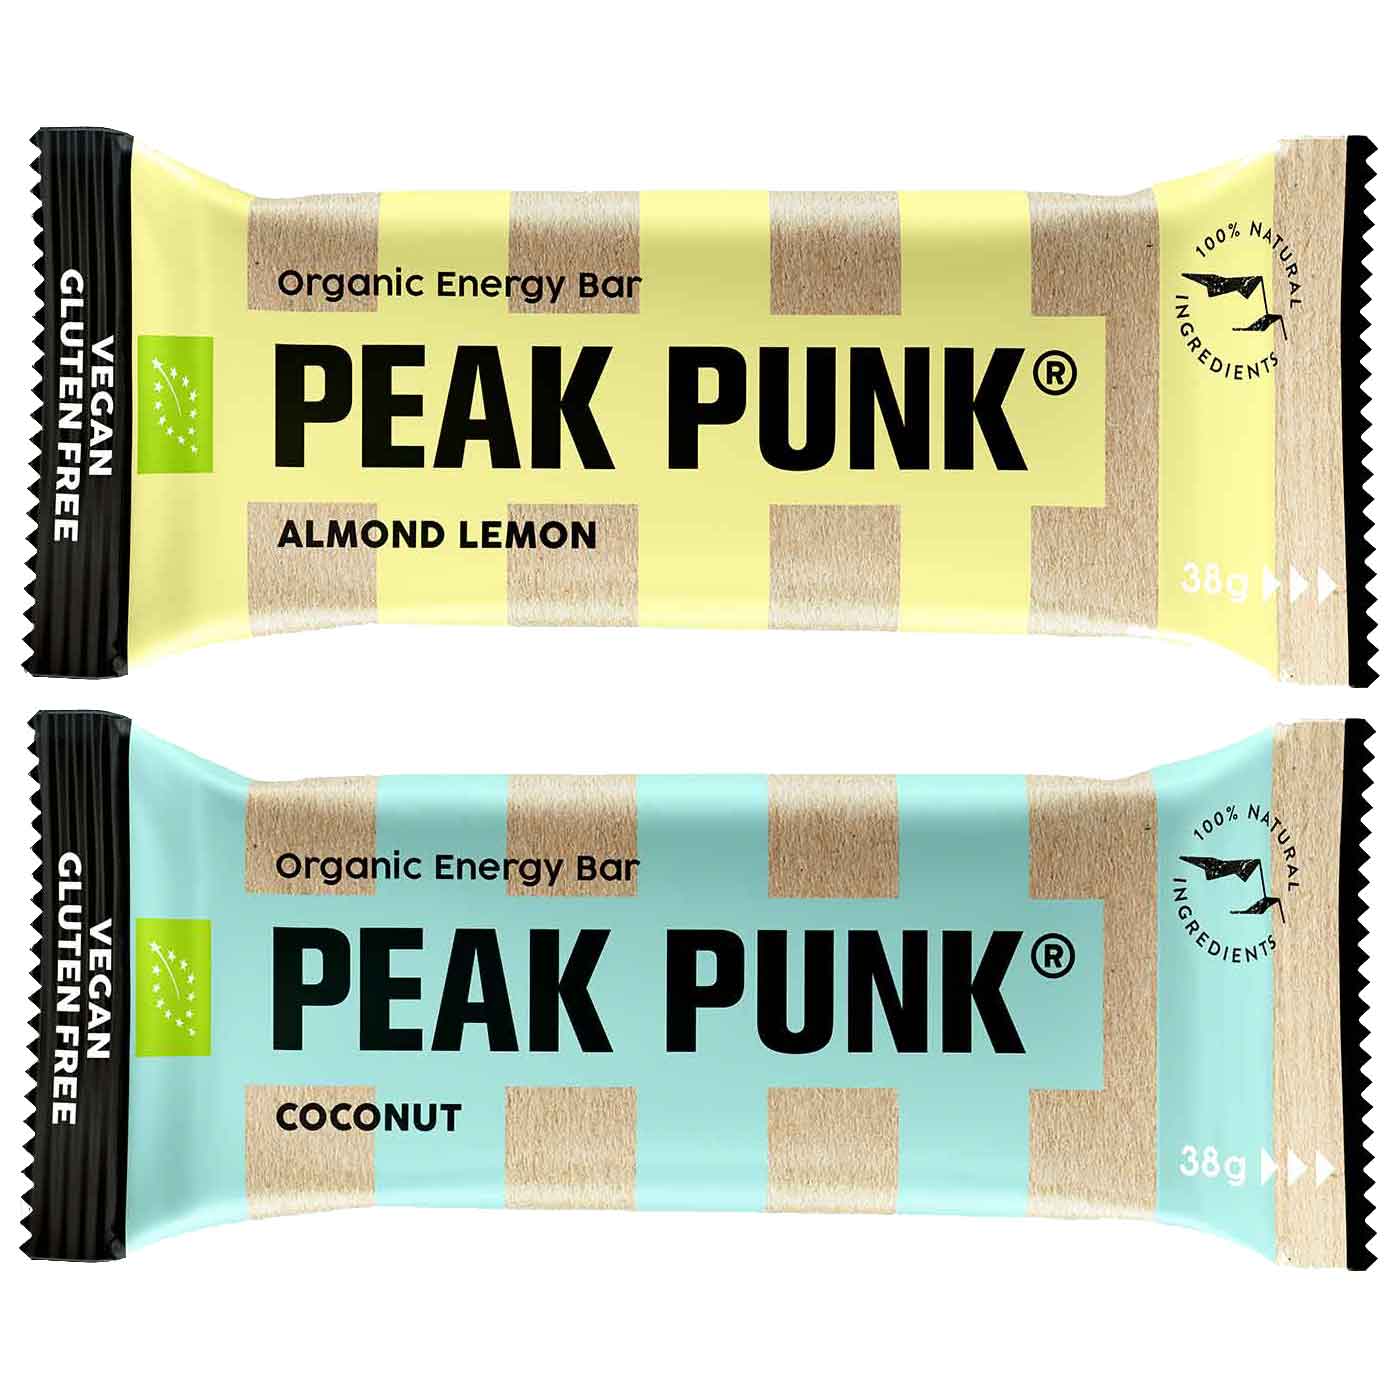 Picture of Peak Punk ORGANIC Energy Bar with Carbohydrates - 38g